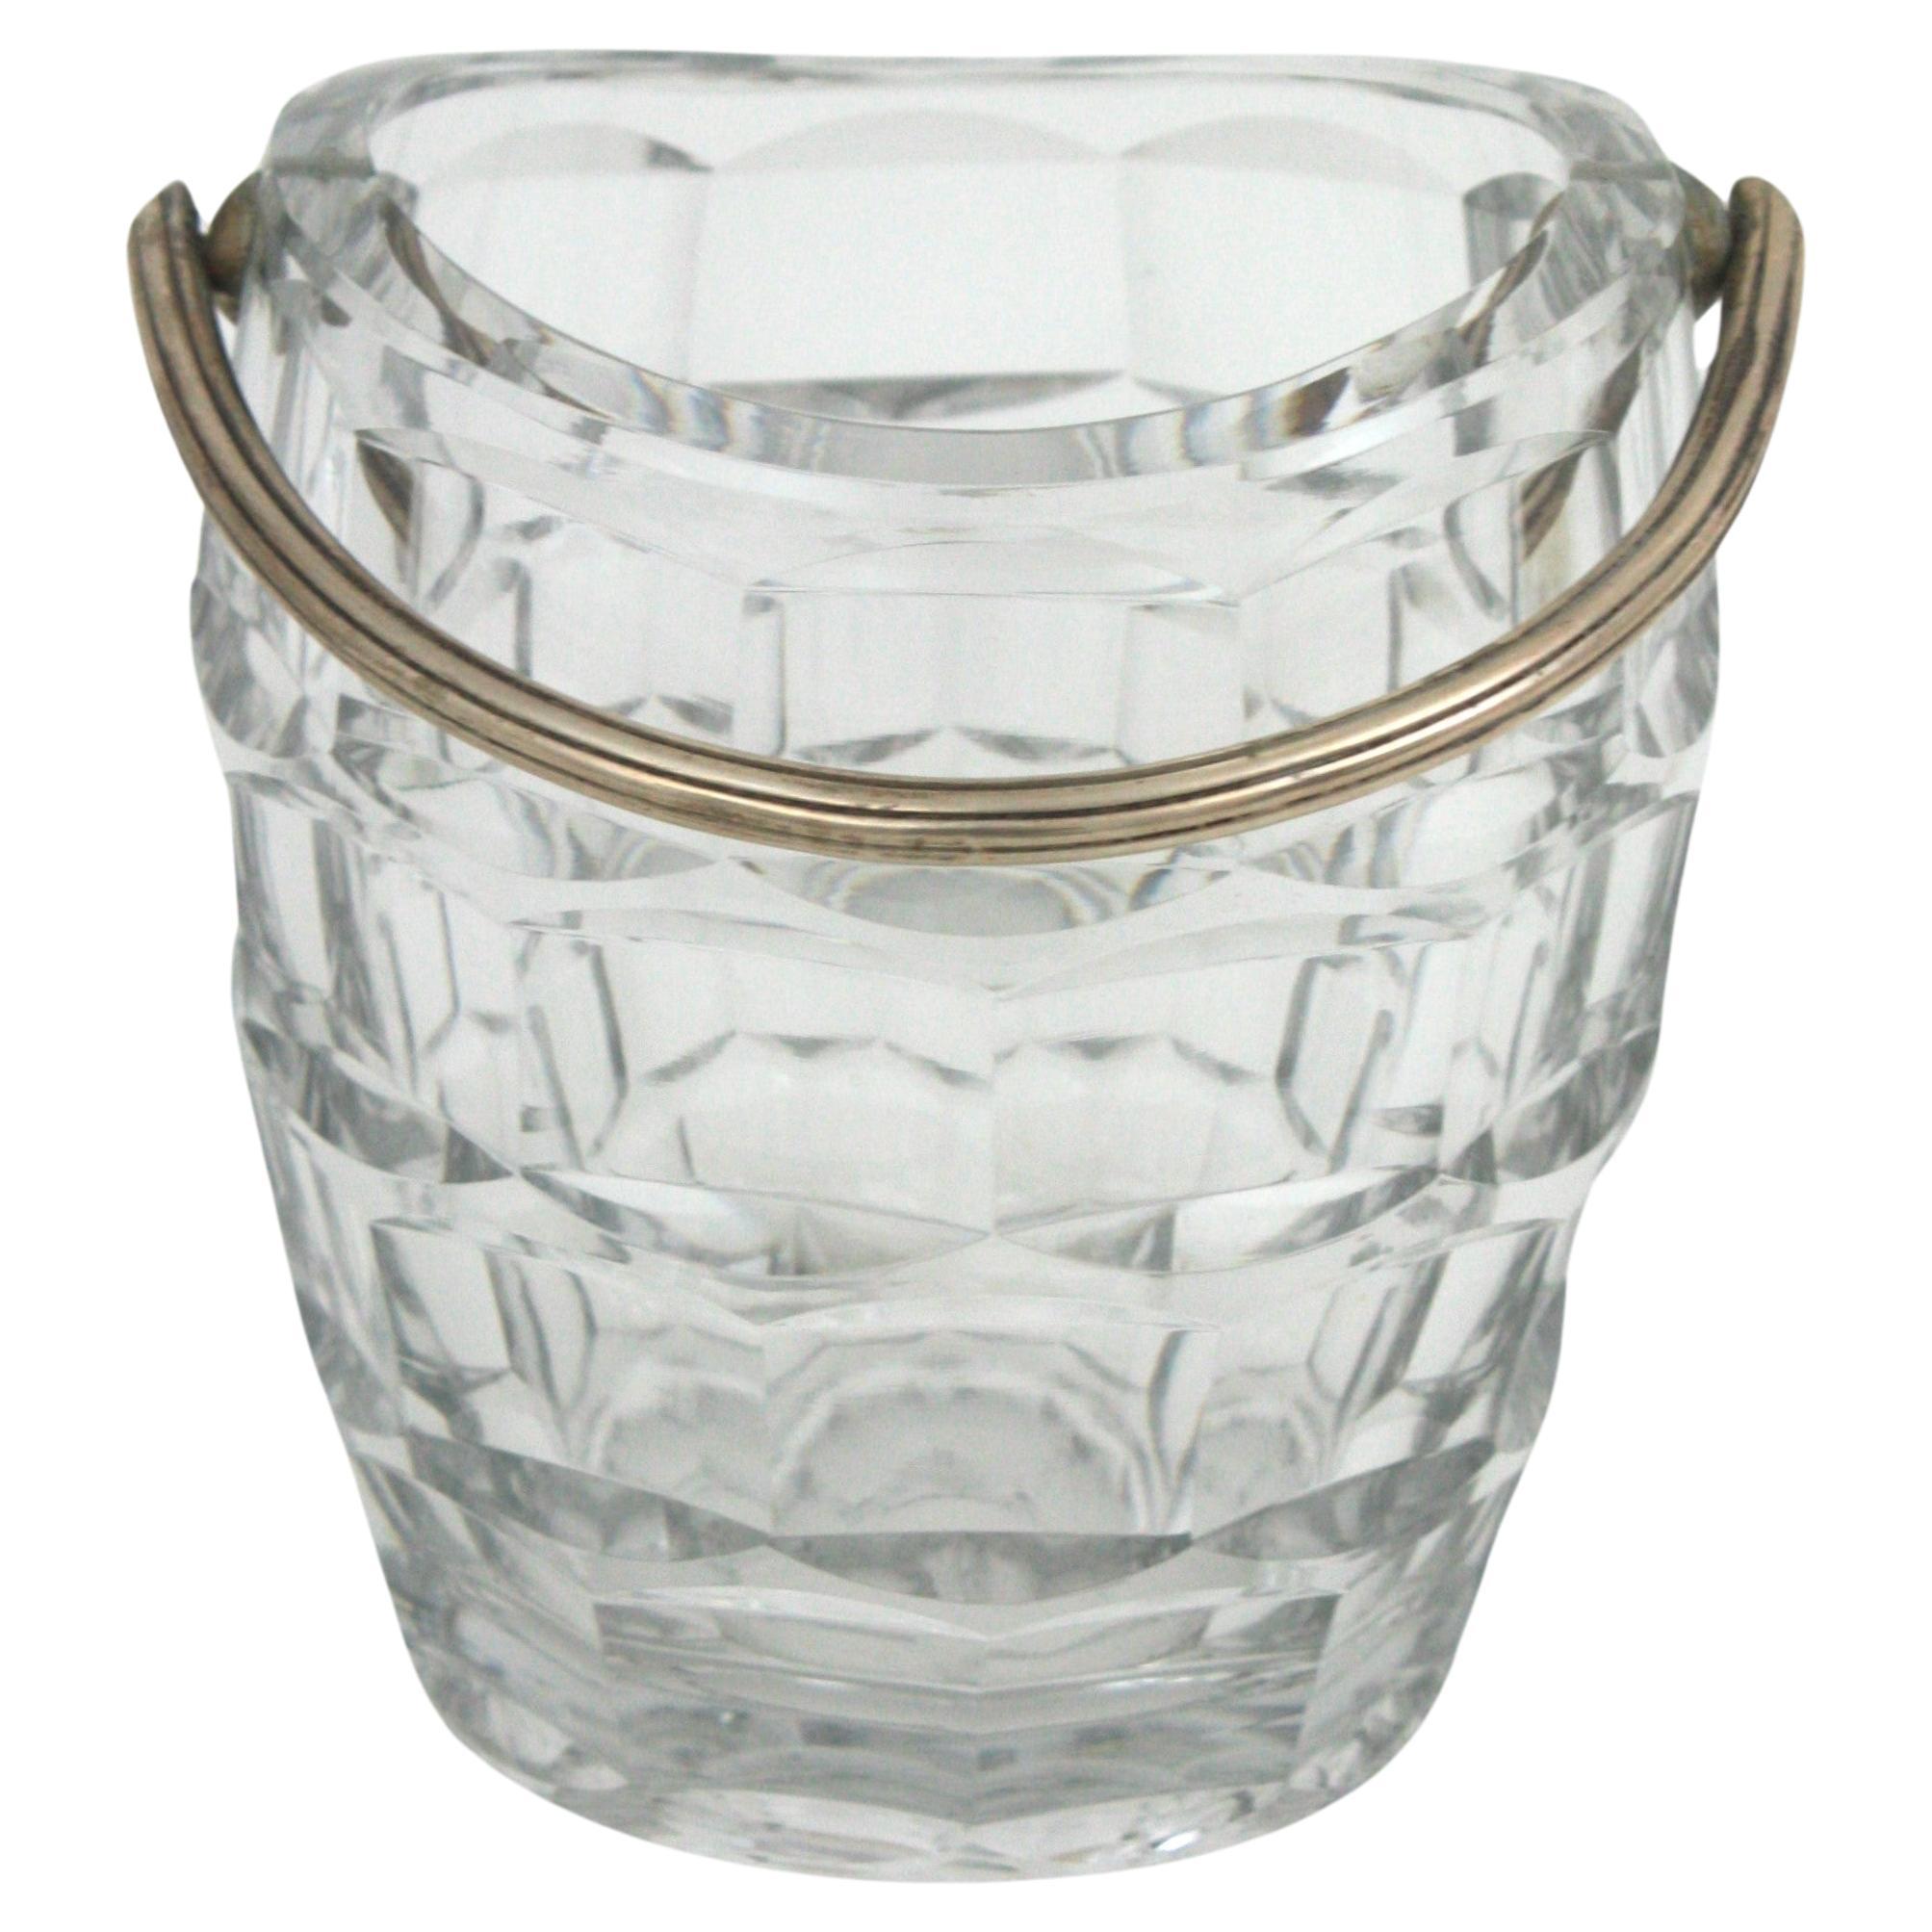 Midcentury Baccarat Cut Crystal and Silver Ice Bucket, 1950s For Sale 1